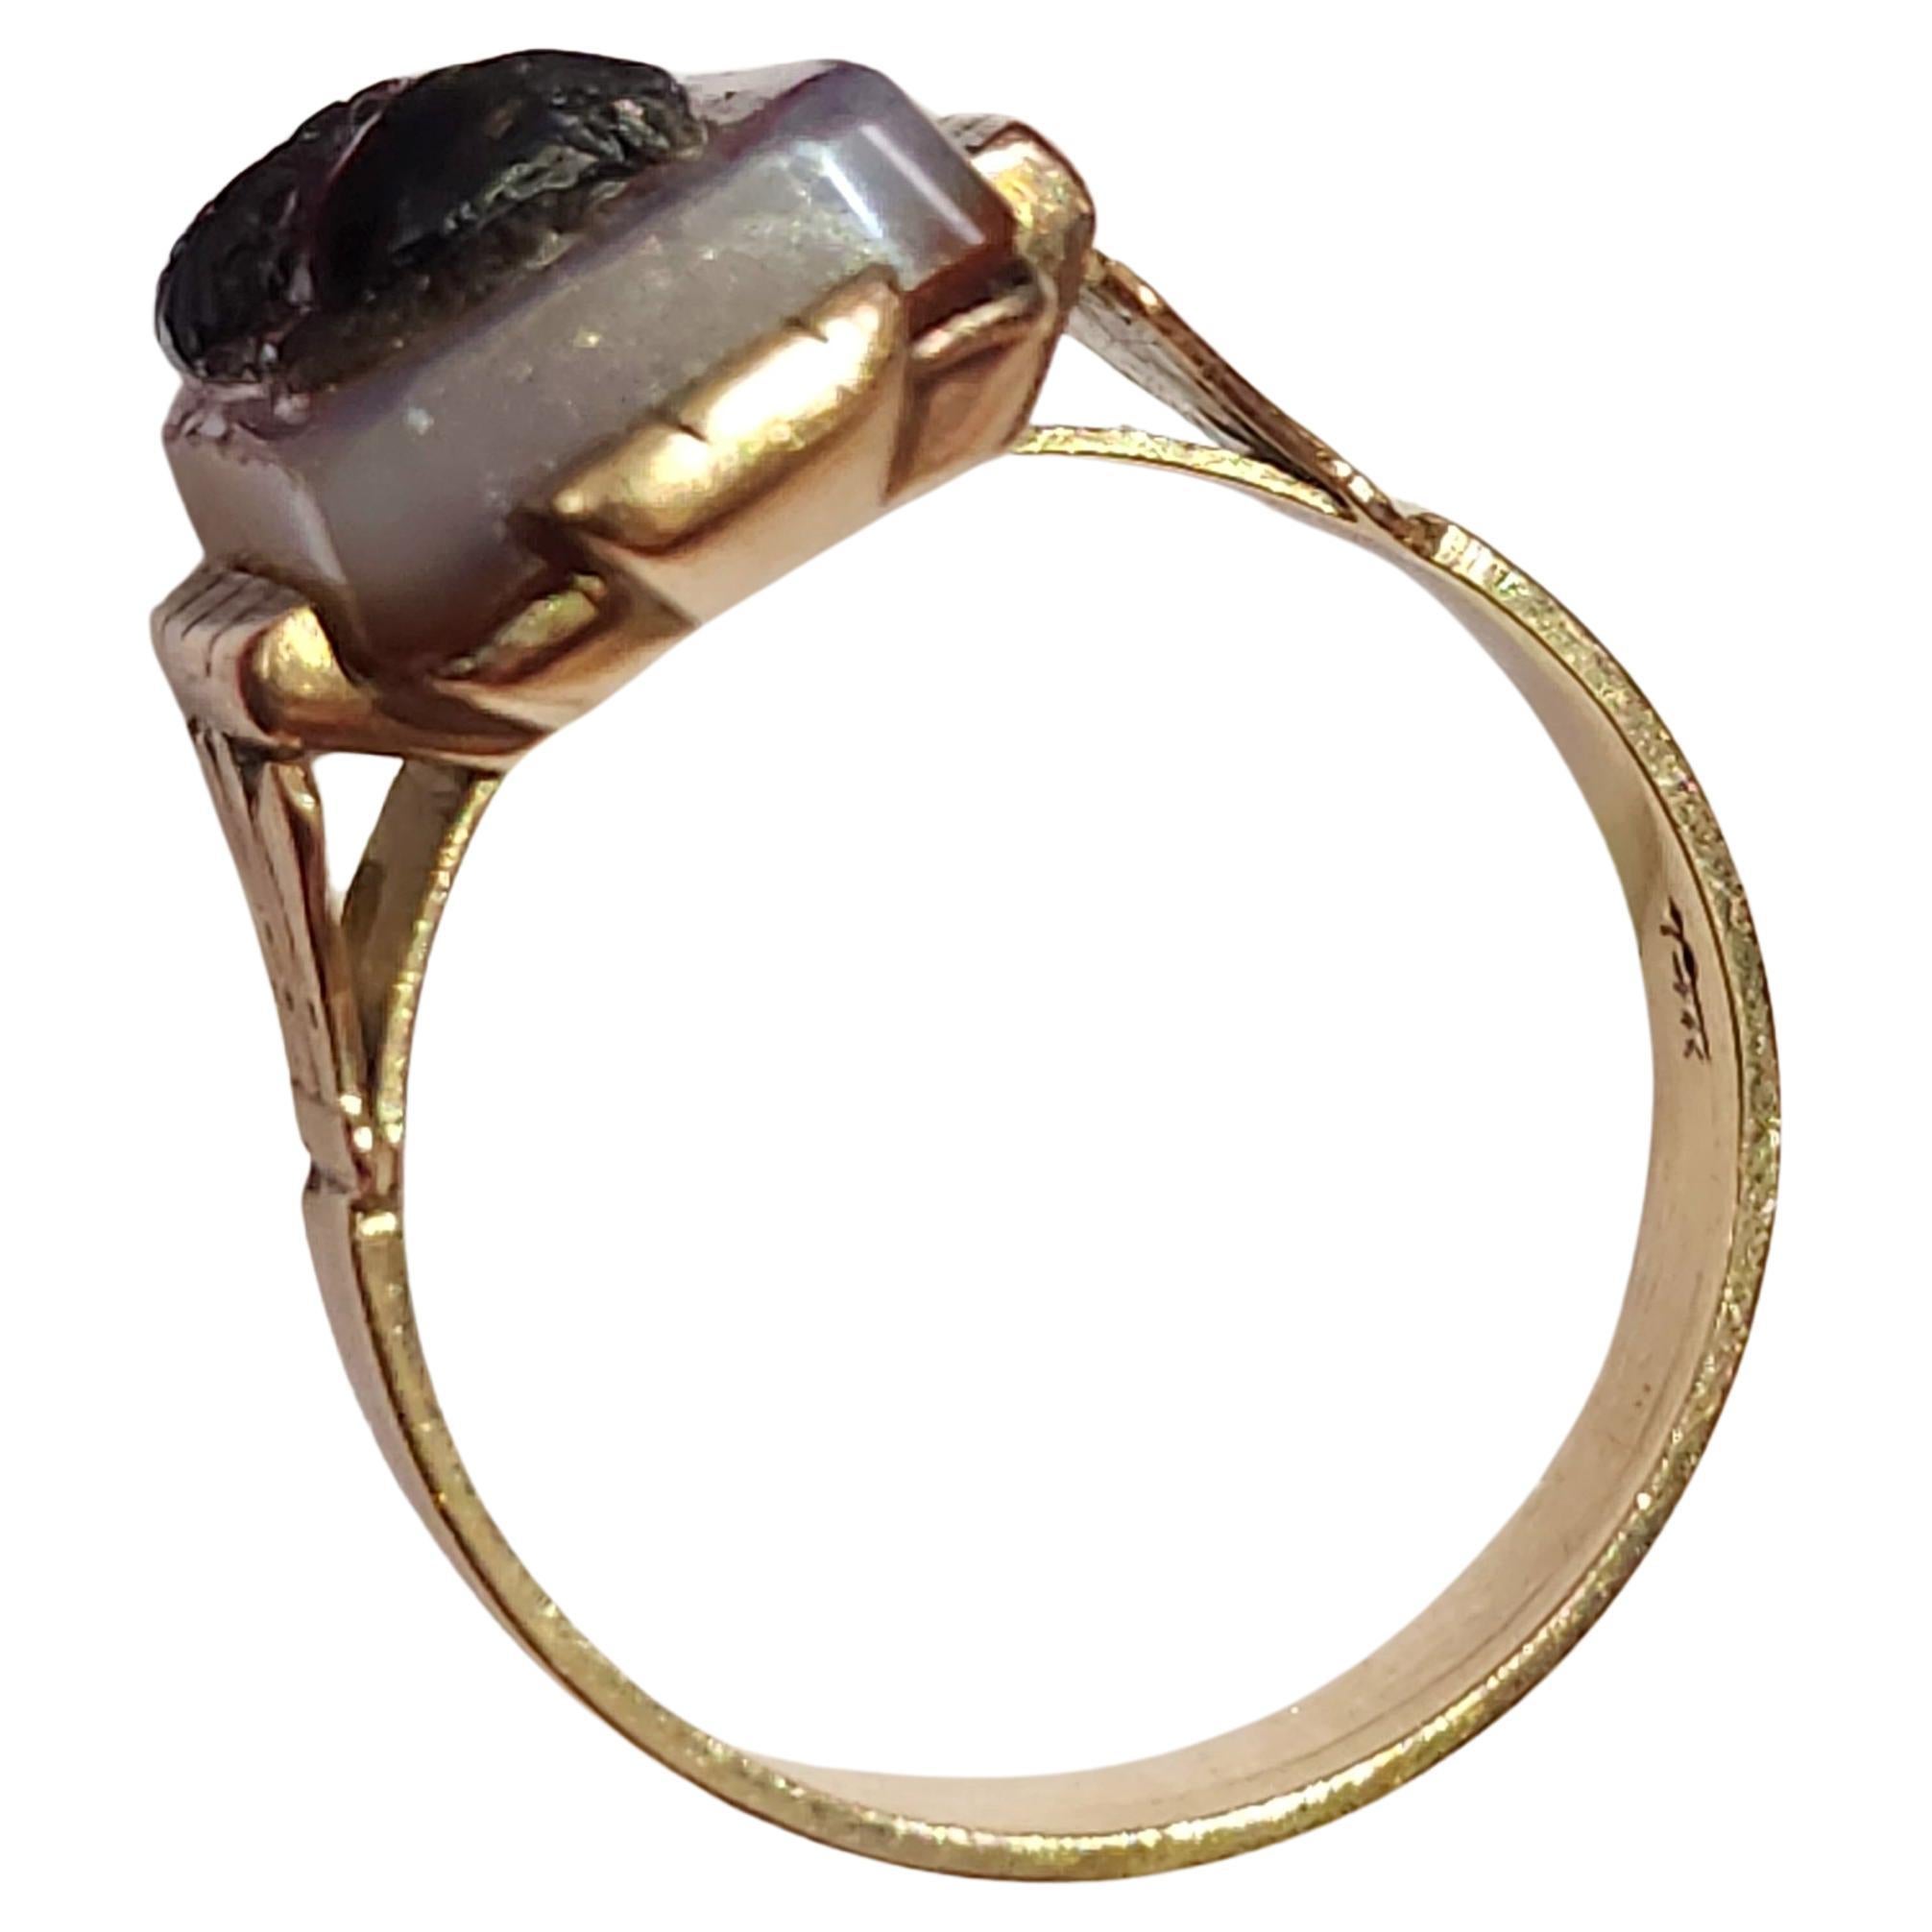 Antique Carnelian (serdolick) Onyx Gold Ring For Sale 2